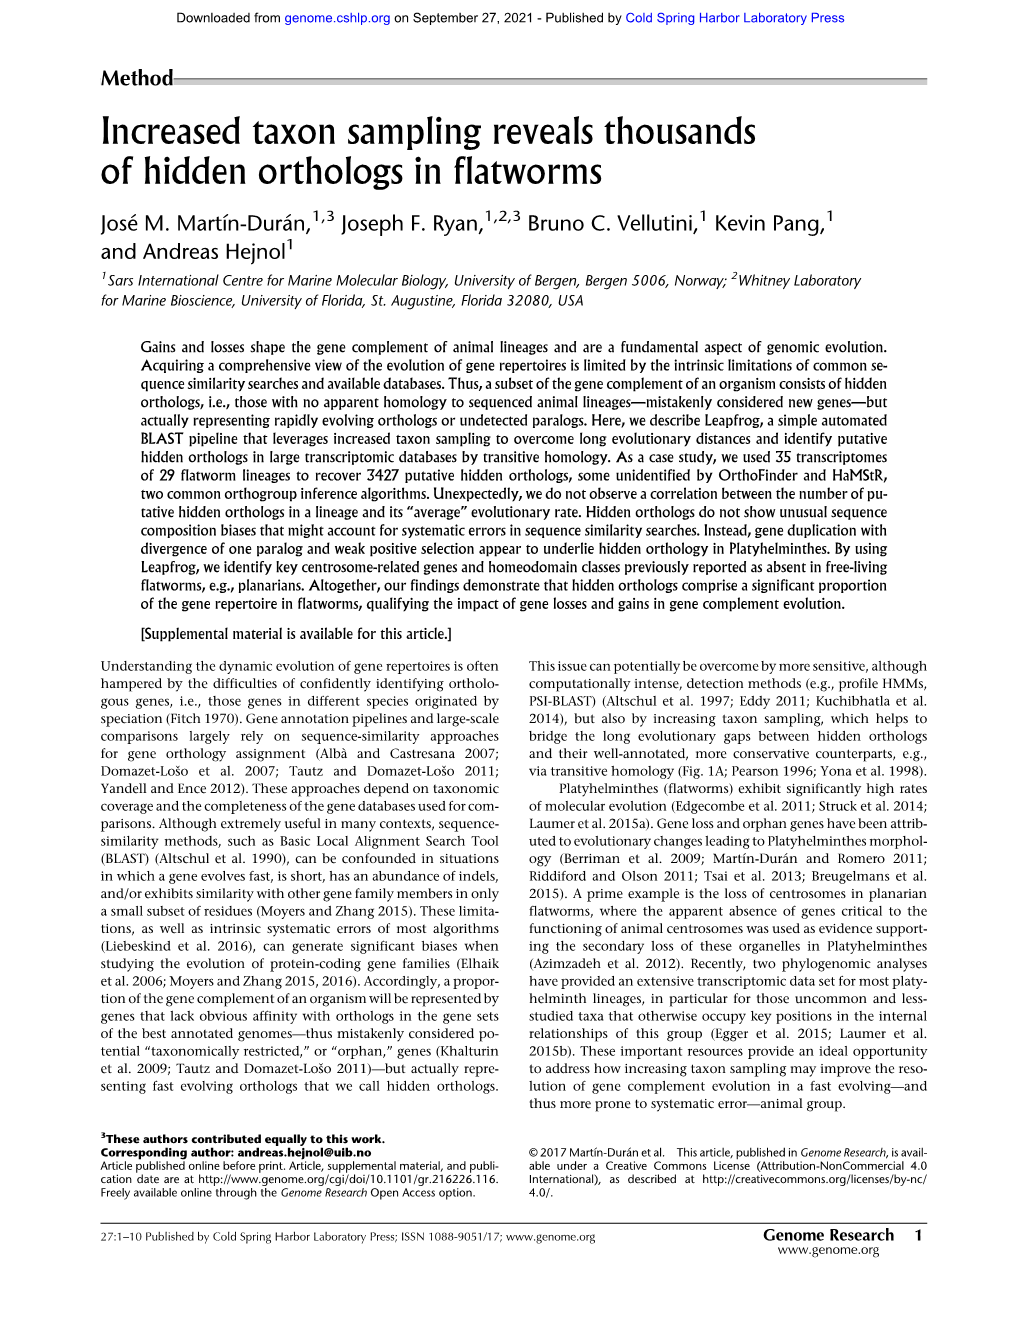 Increased Taxon Sampling Reveals Thousands of Hidden Orthologs in Flatworms